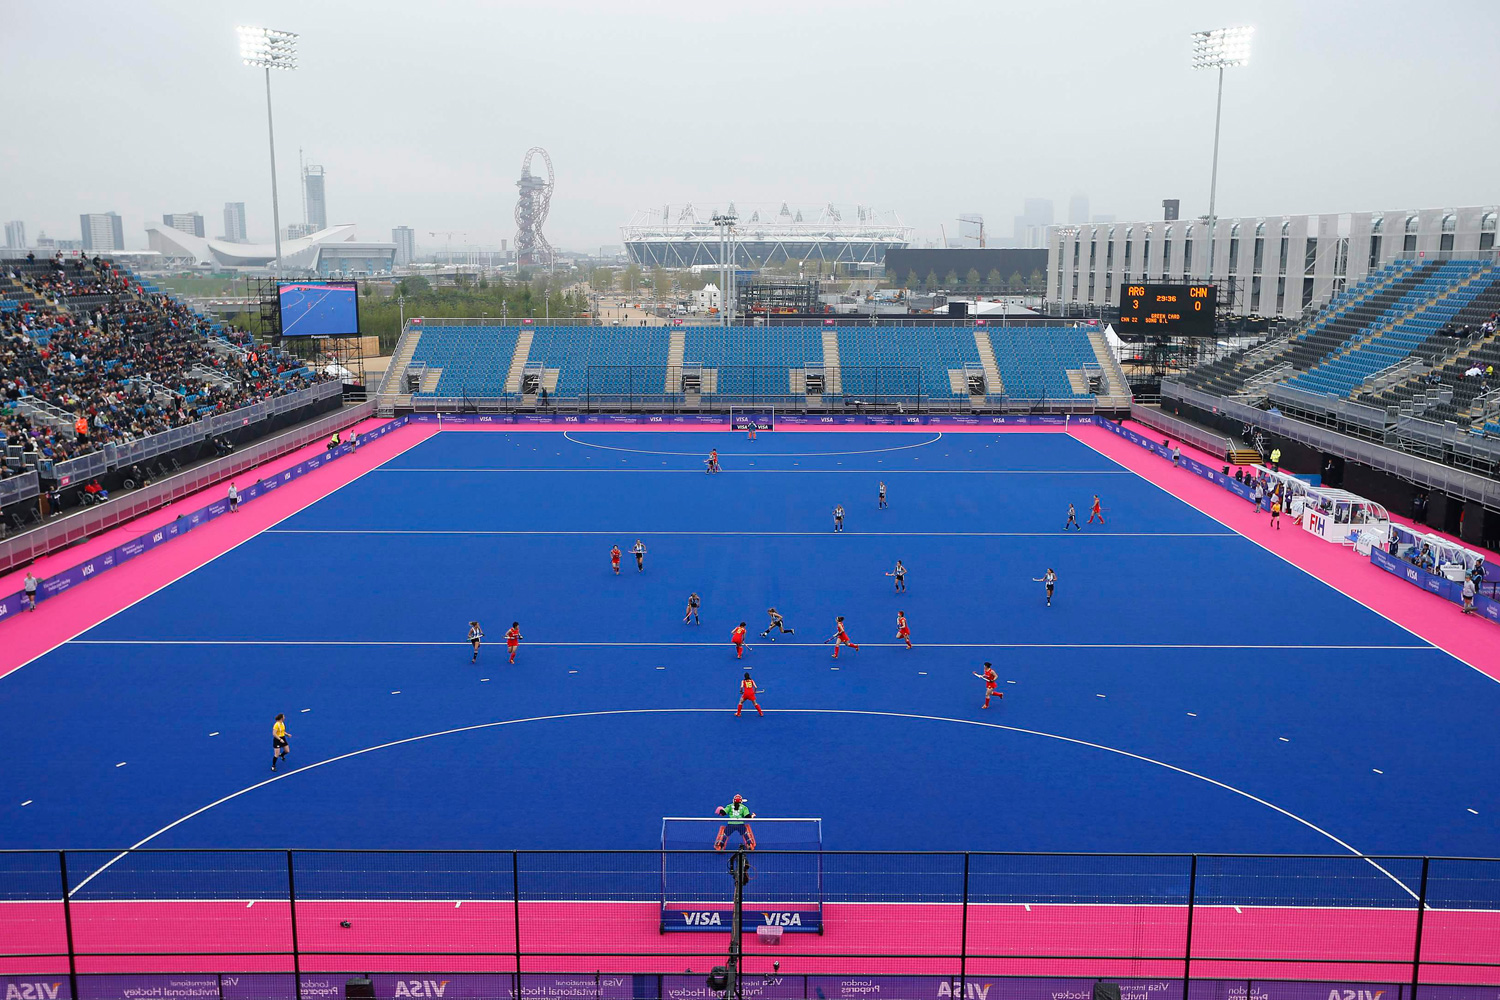 May 2, 2012. Argentina plays China in the women's International Invitational Hockey Tournament at the Riverbank Arena on the Olympic Park in London.